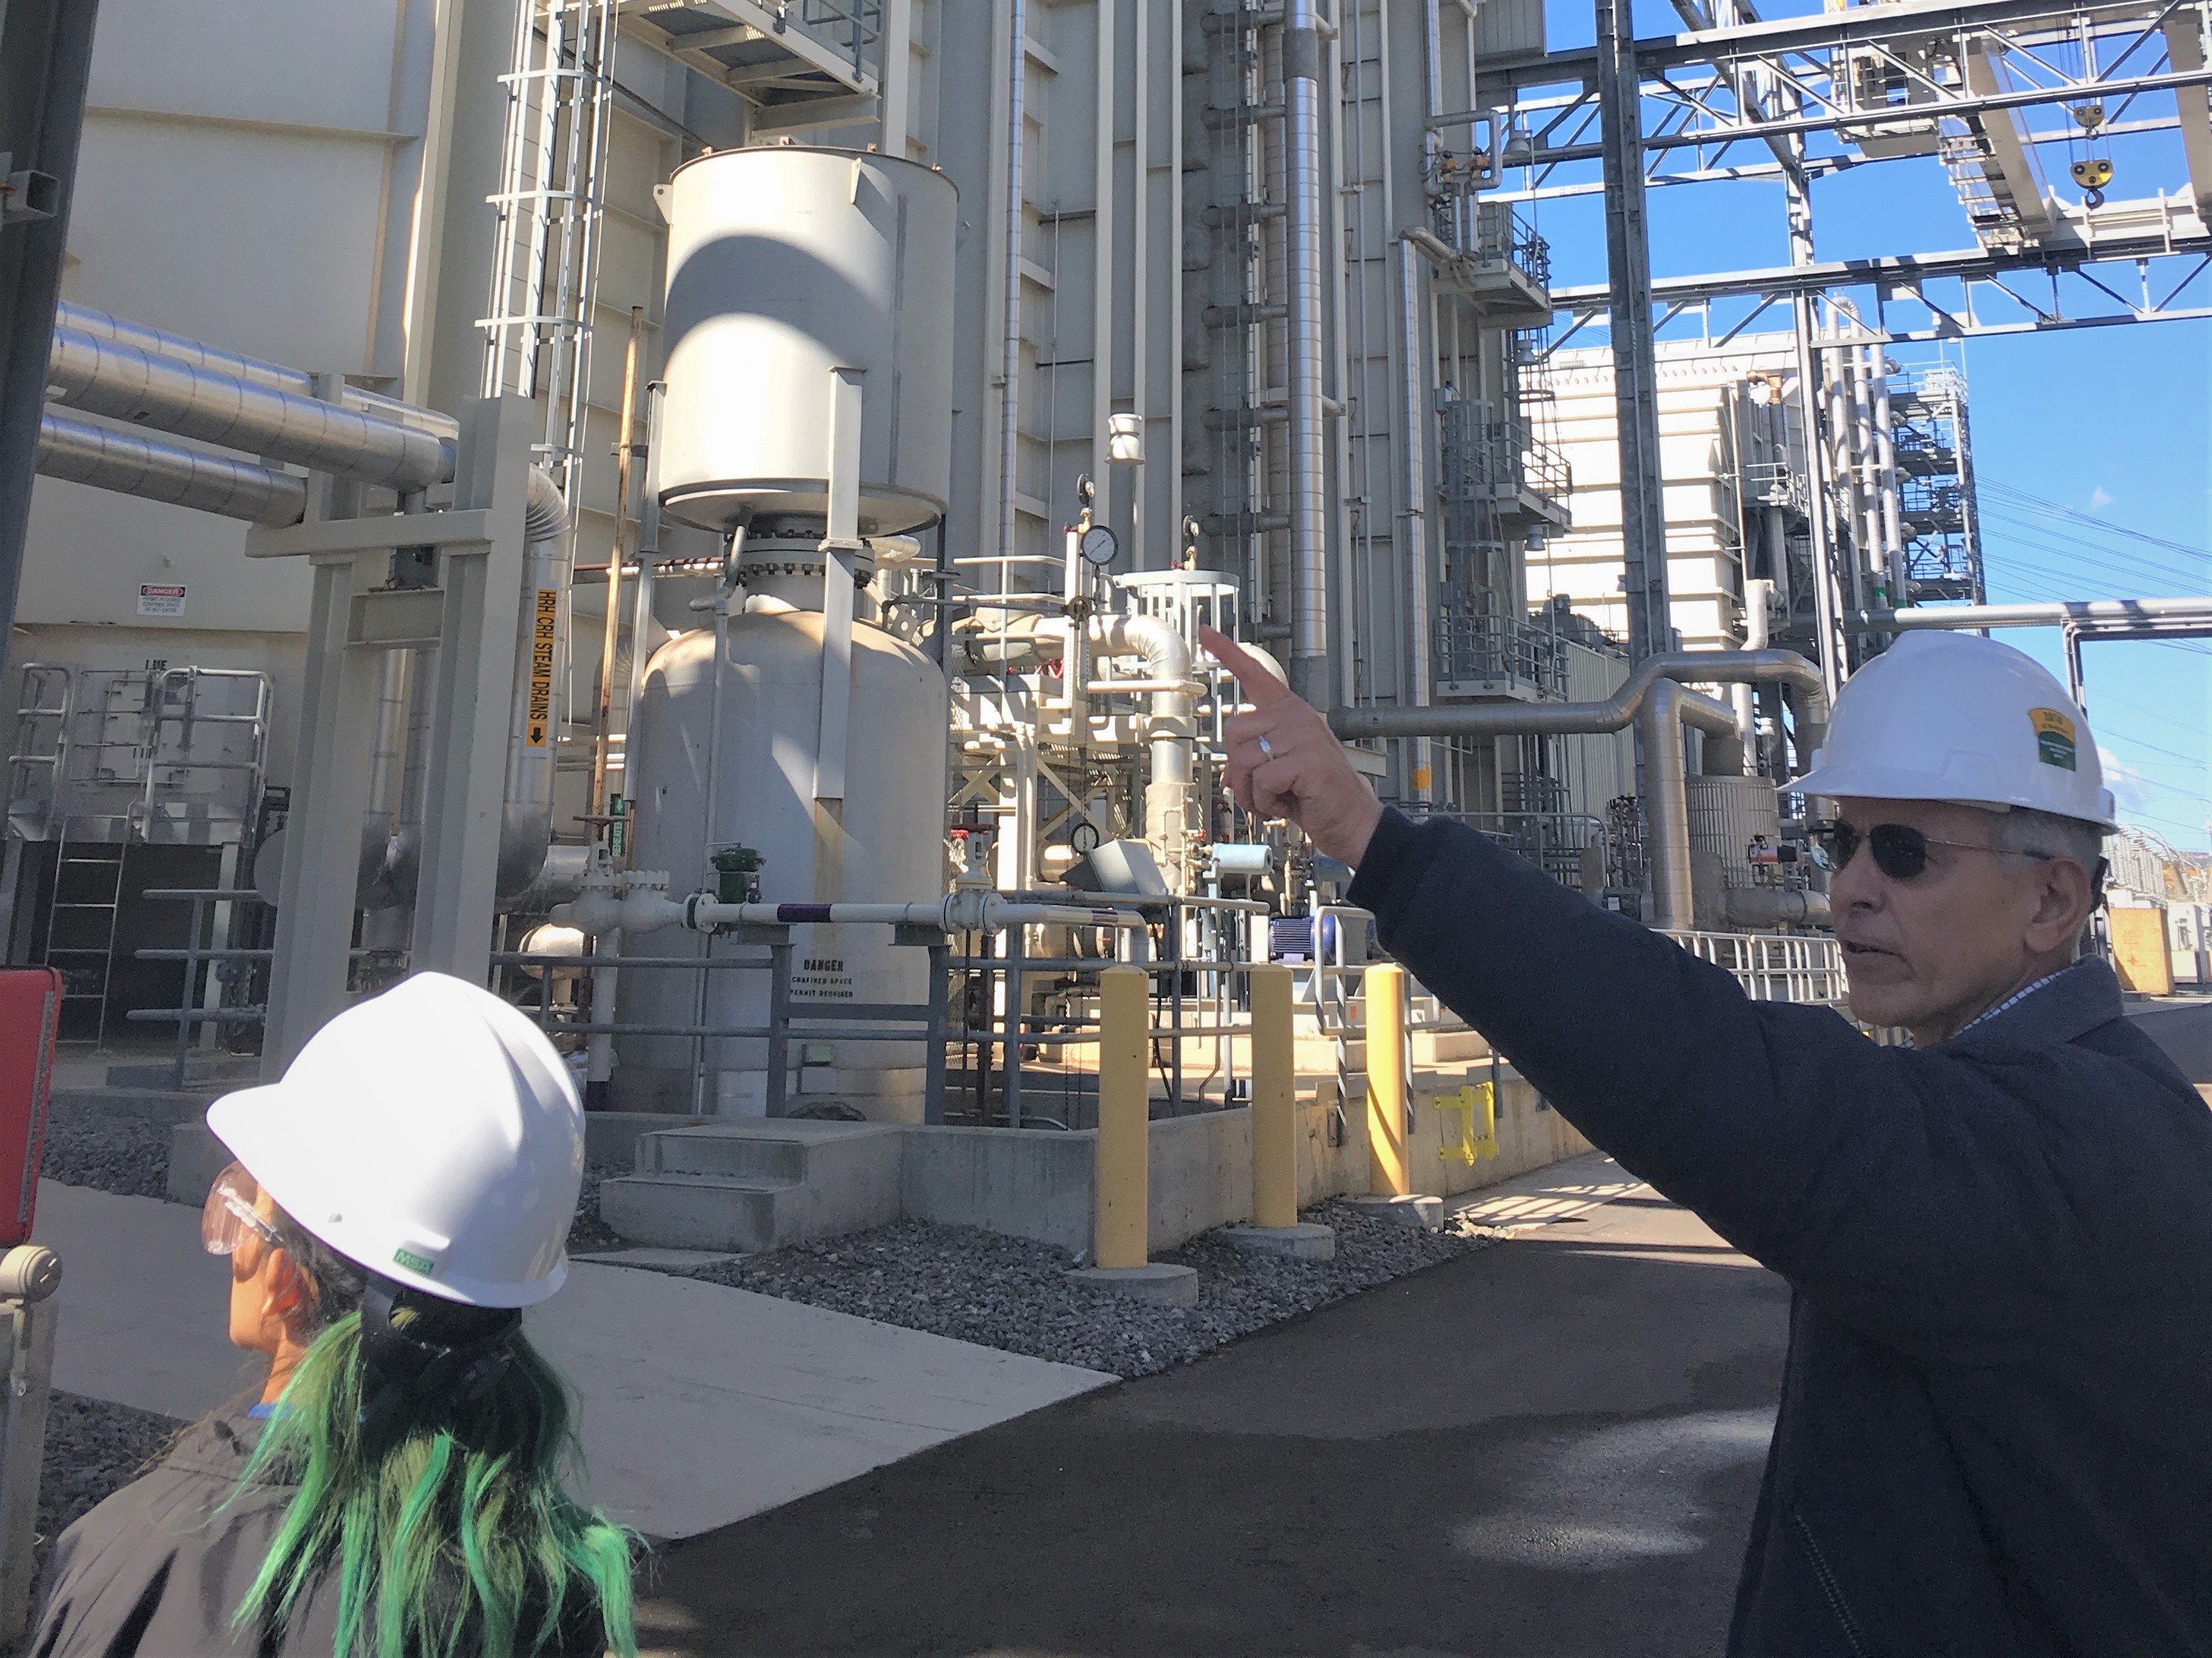 Carl La Peter, plant manager at Palomar Energy Center, educates students on how the power plant converts and transfers energy, from clean natural gas, to produce electricity for 420,000 homes.